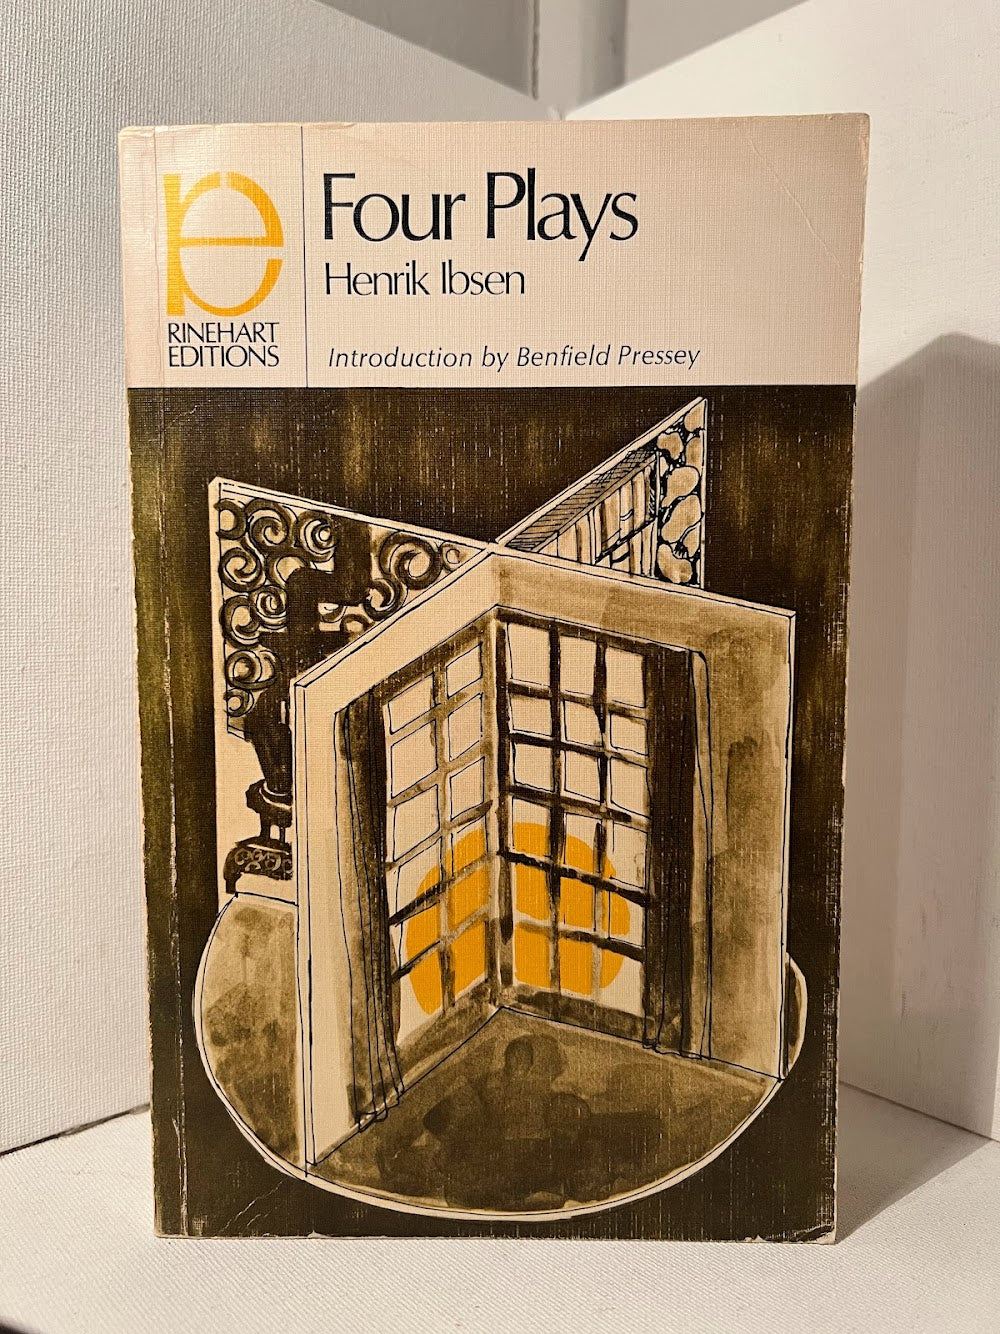 Four Plays by Henrik Ibsen